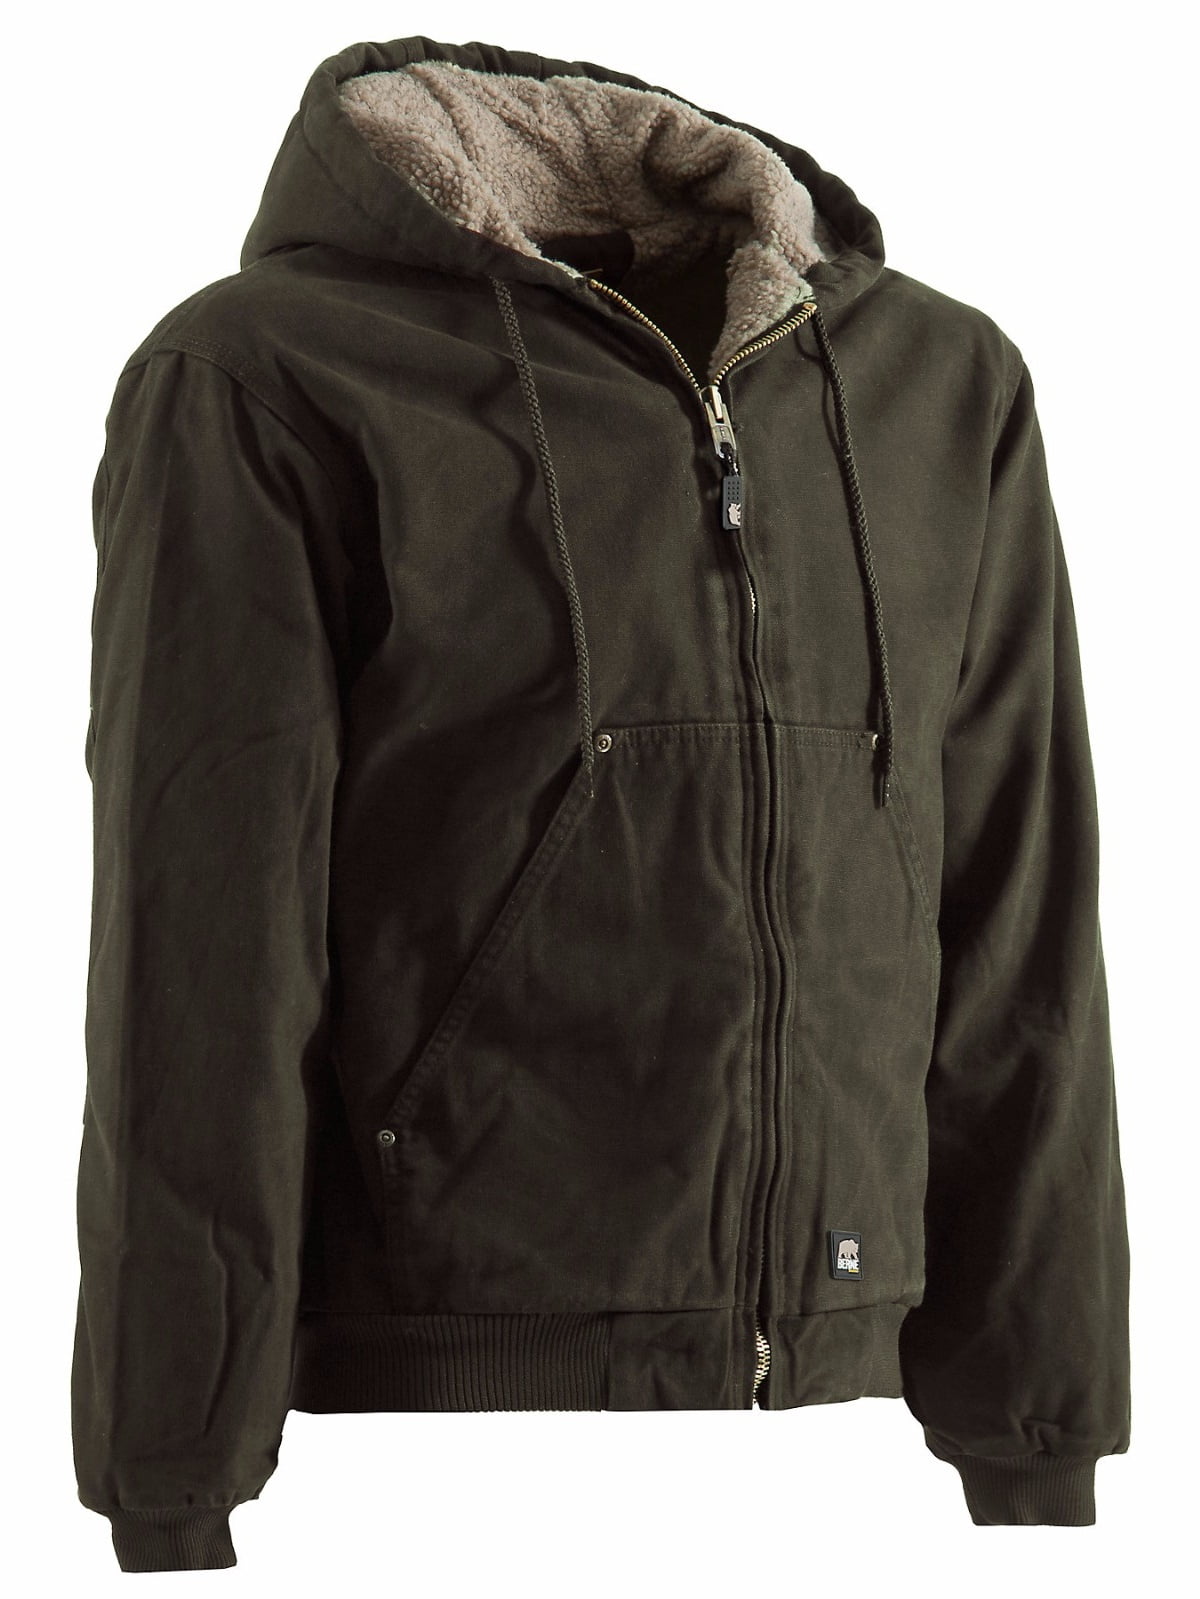 Berne - High Country Hooded Jacket - Sherpa Lined - Walmart.com ...